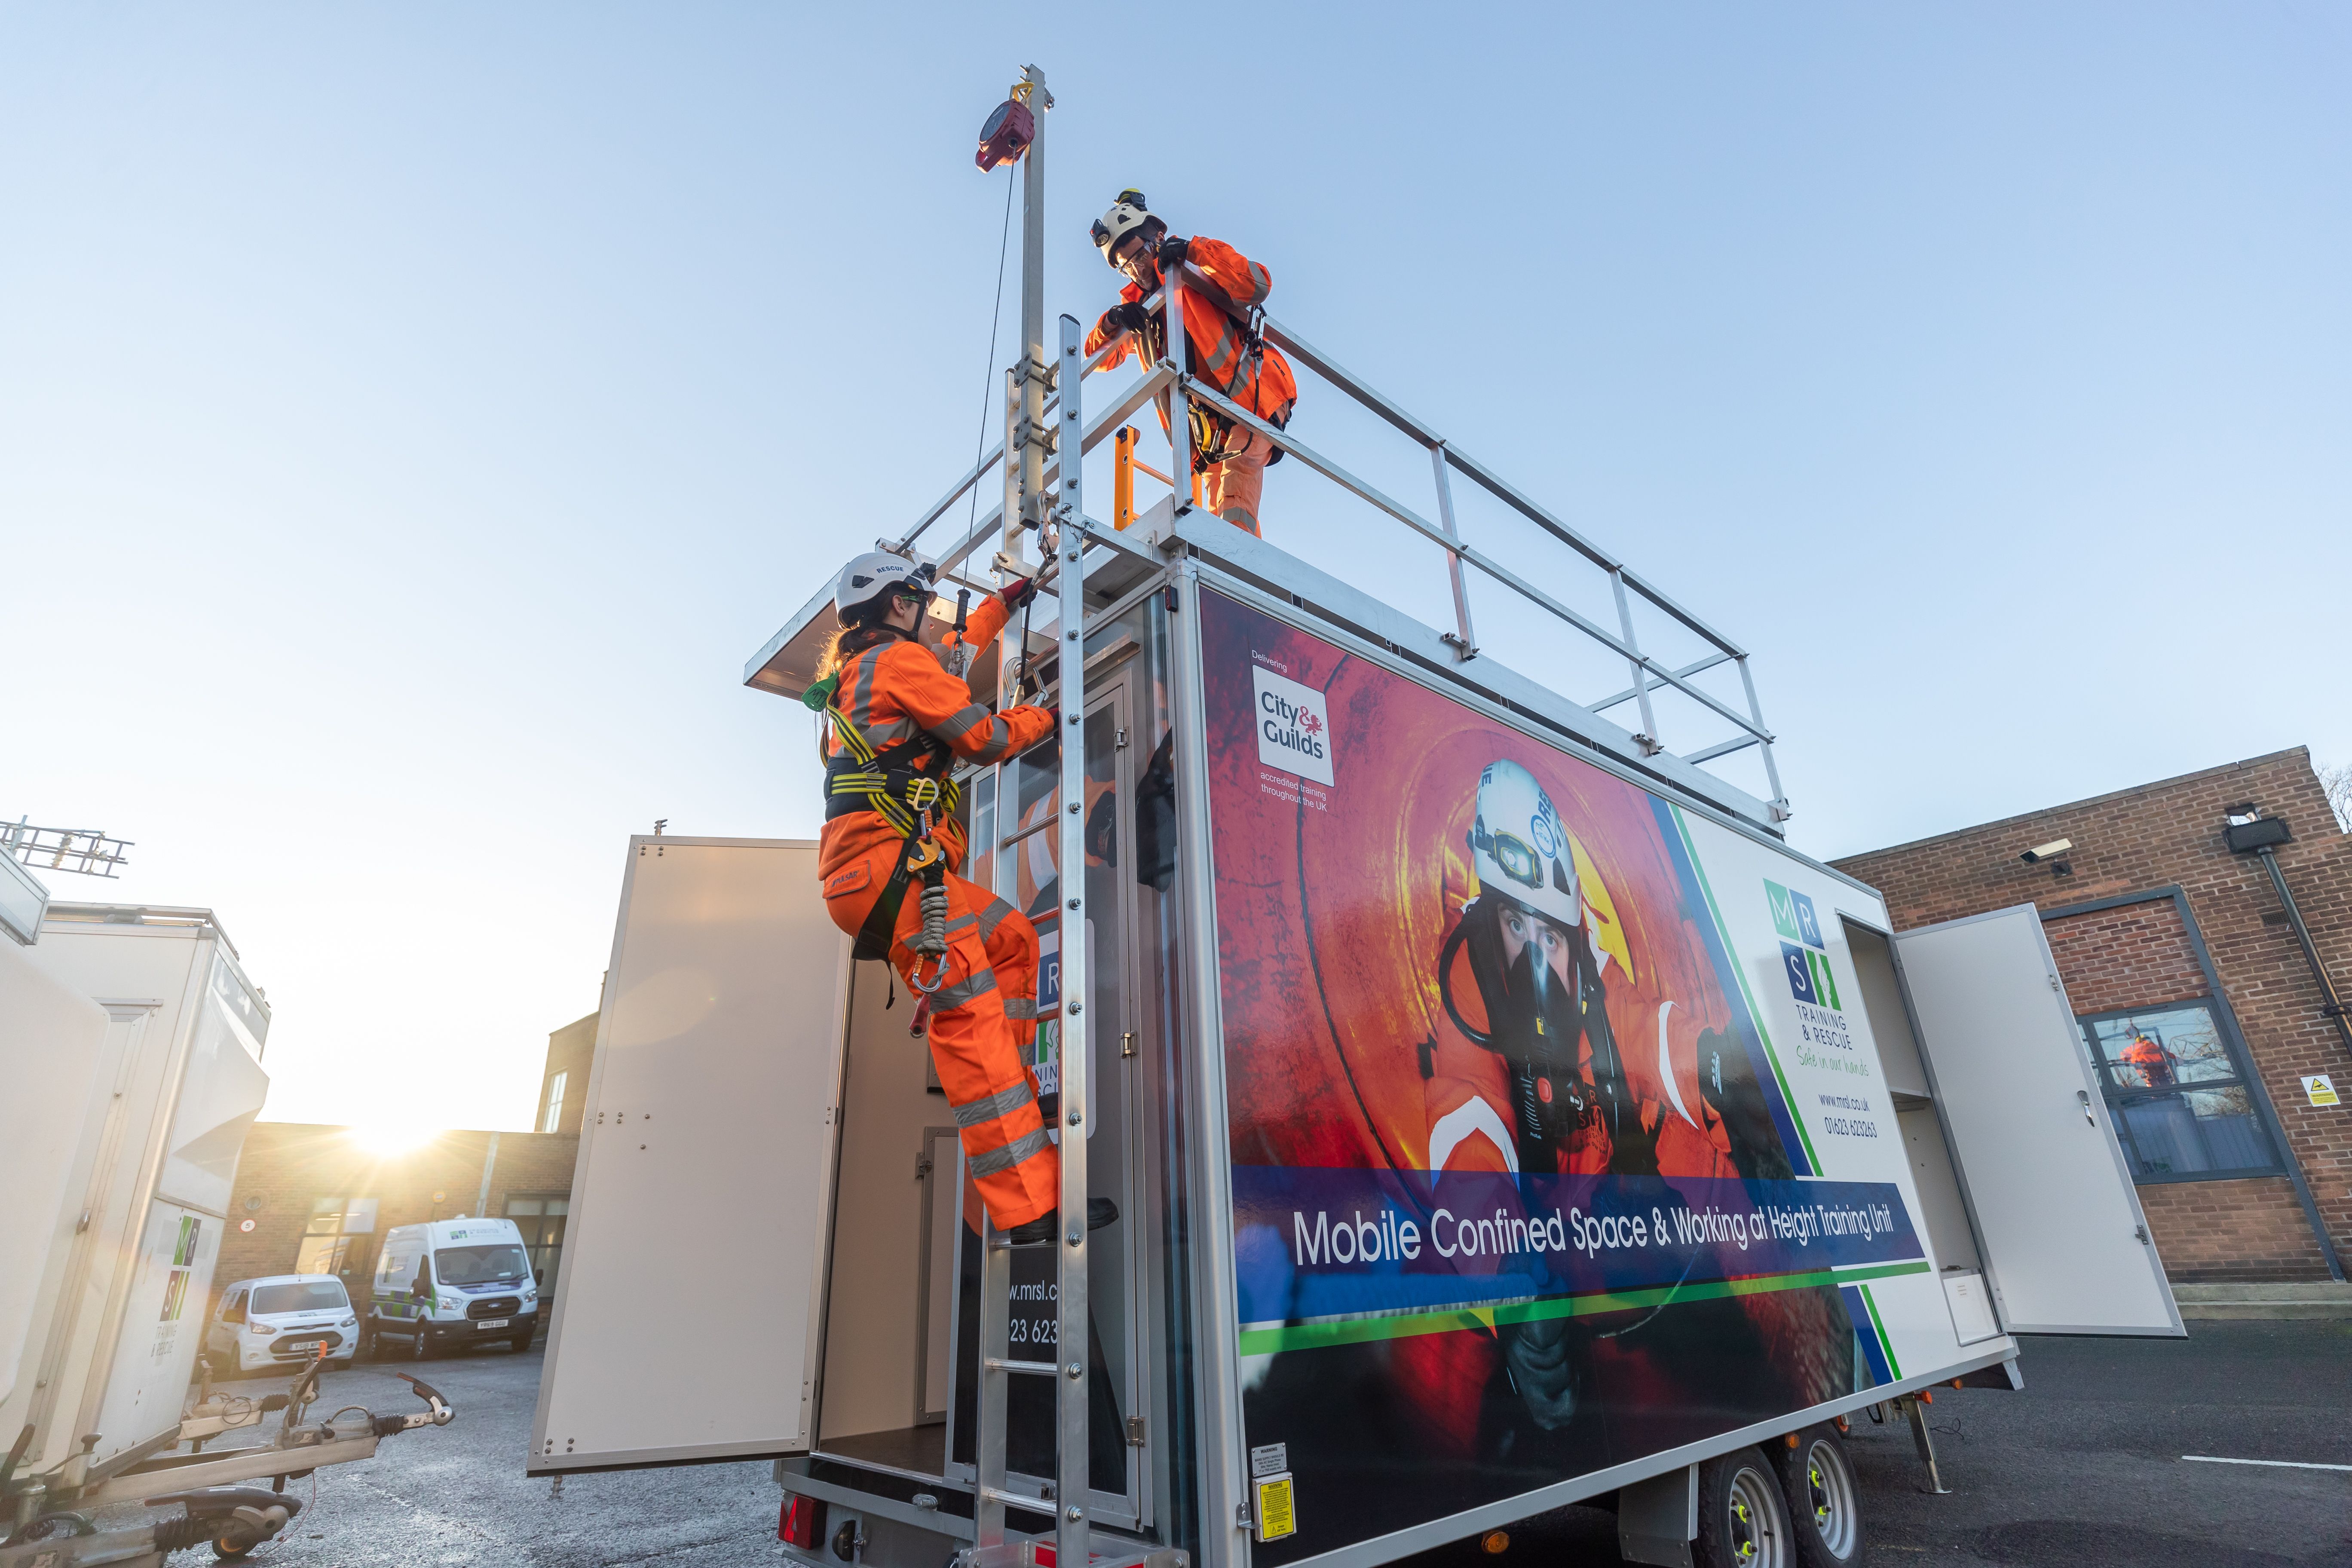 Mobile Confined Space Training